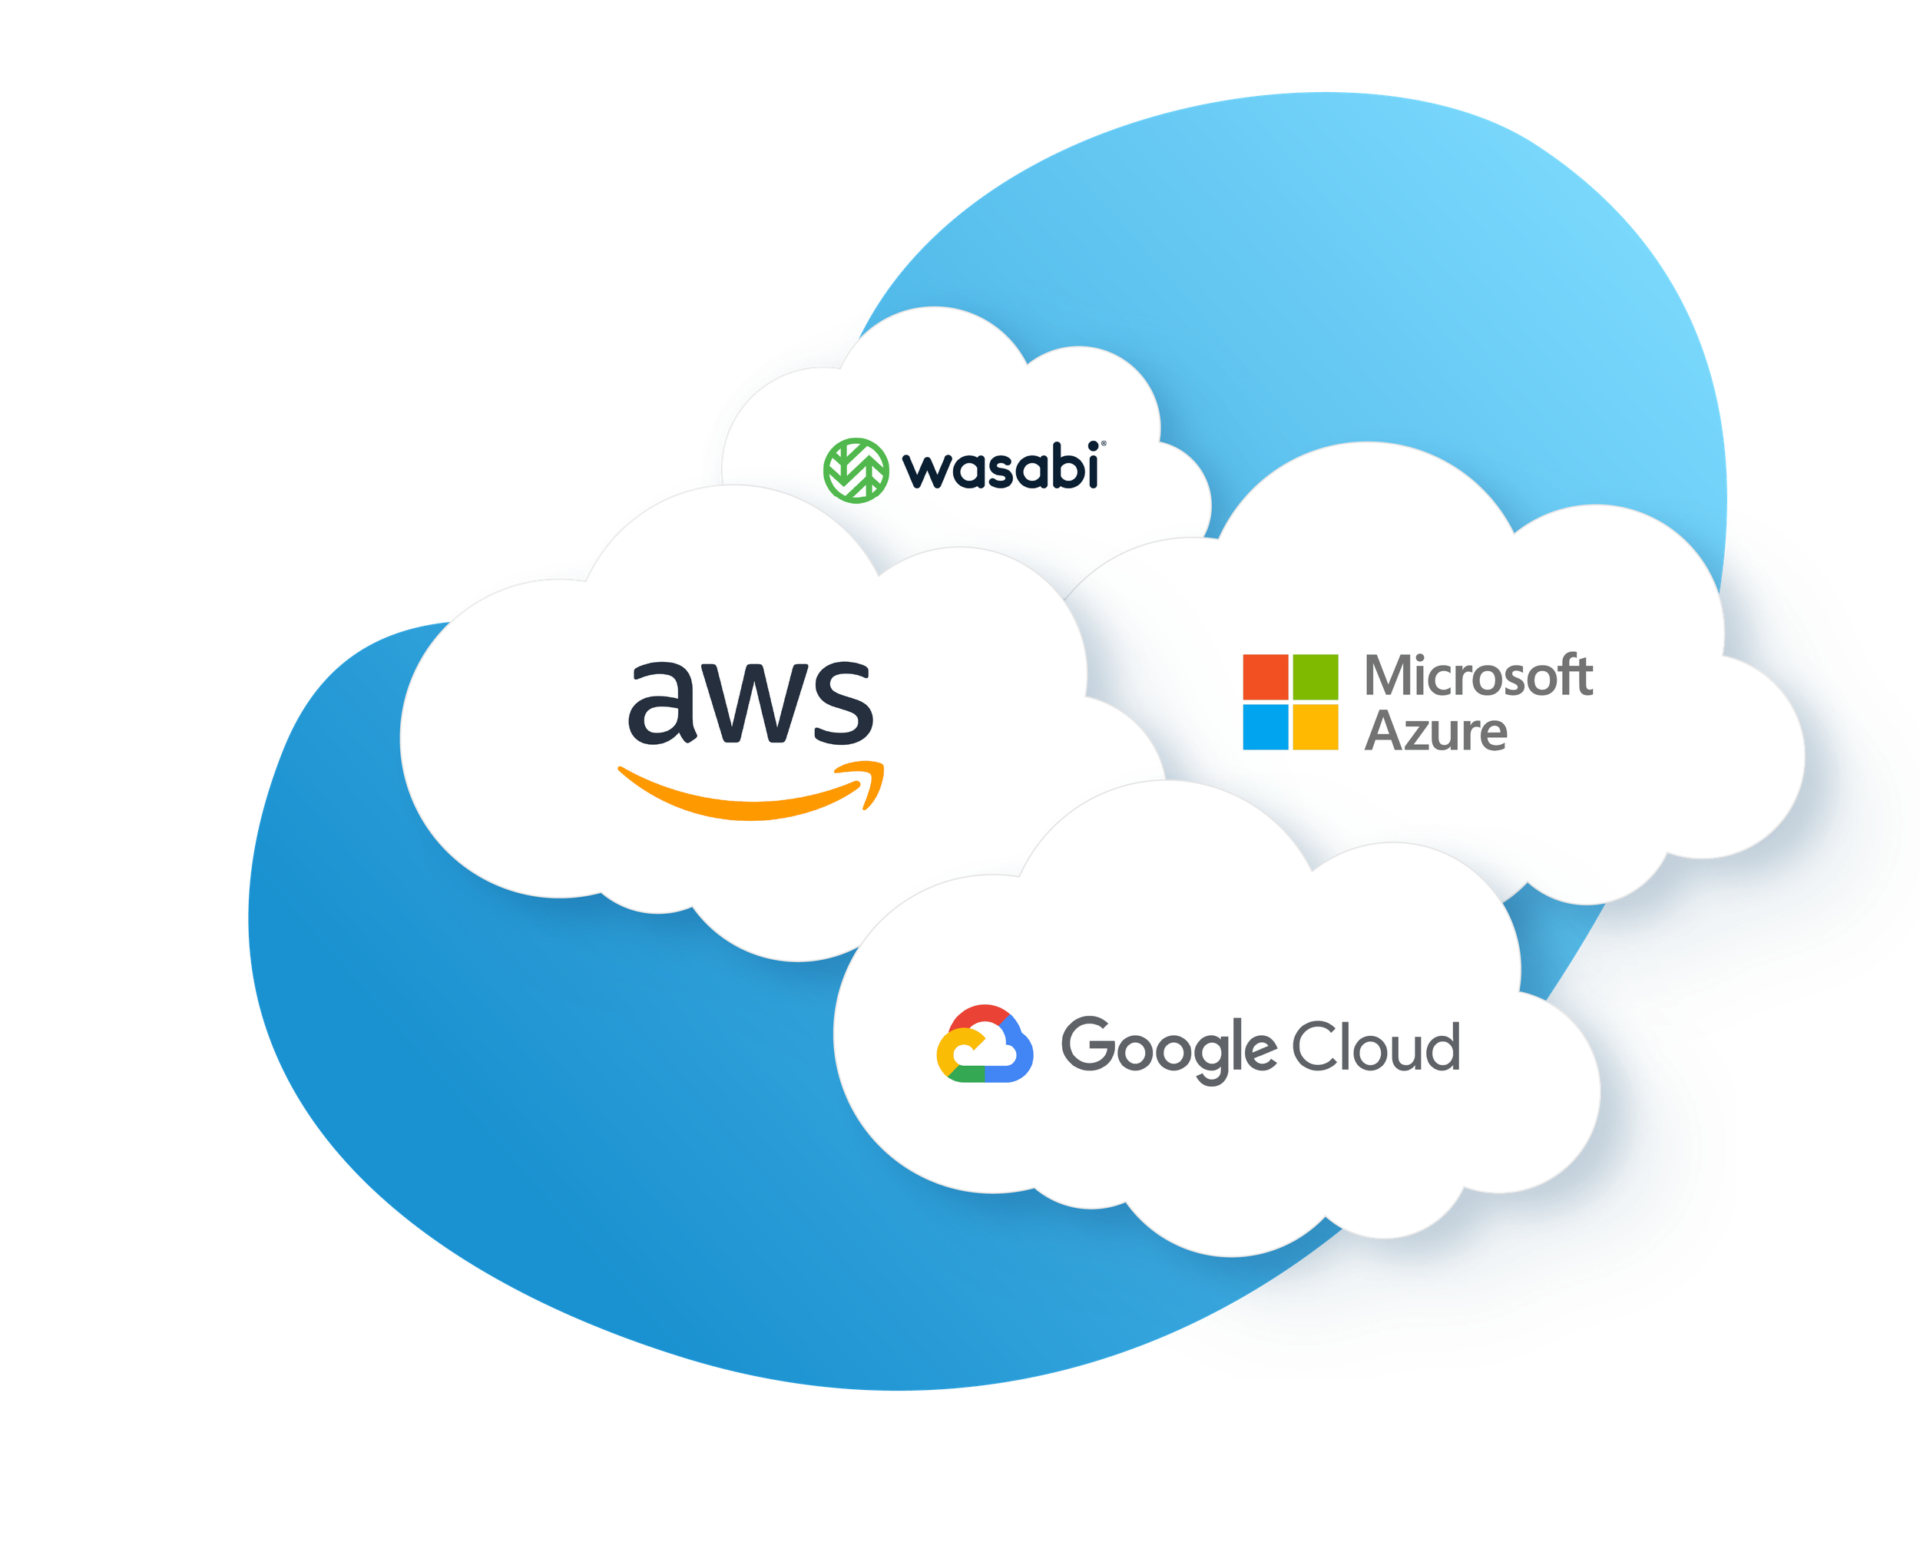 4 Clouds with Wasabi, AWS, Microsoft Azure, and Google Cloud